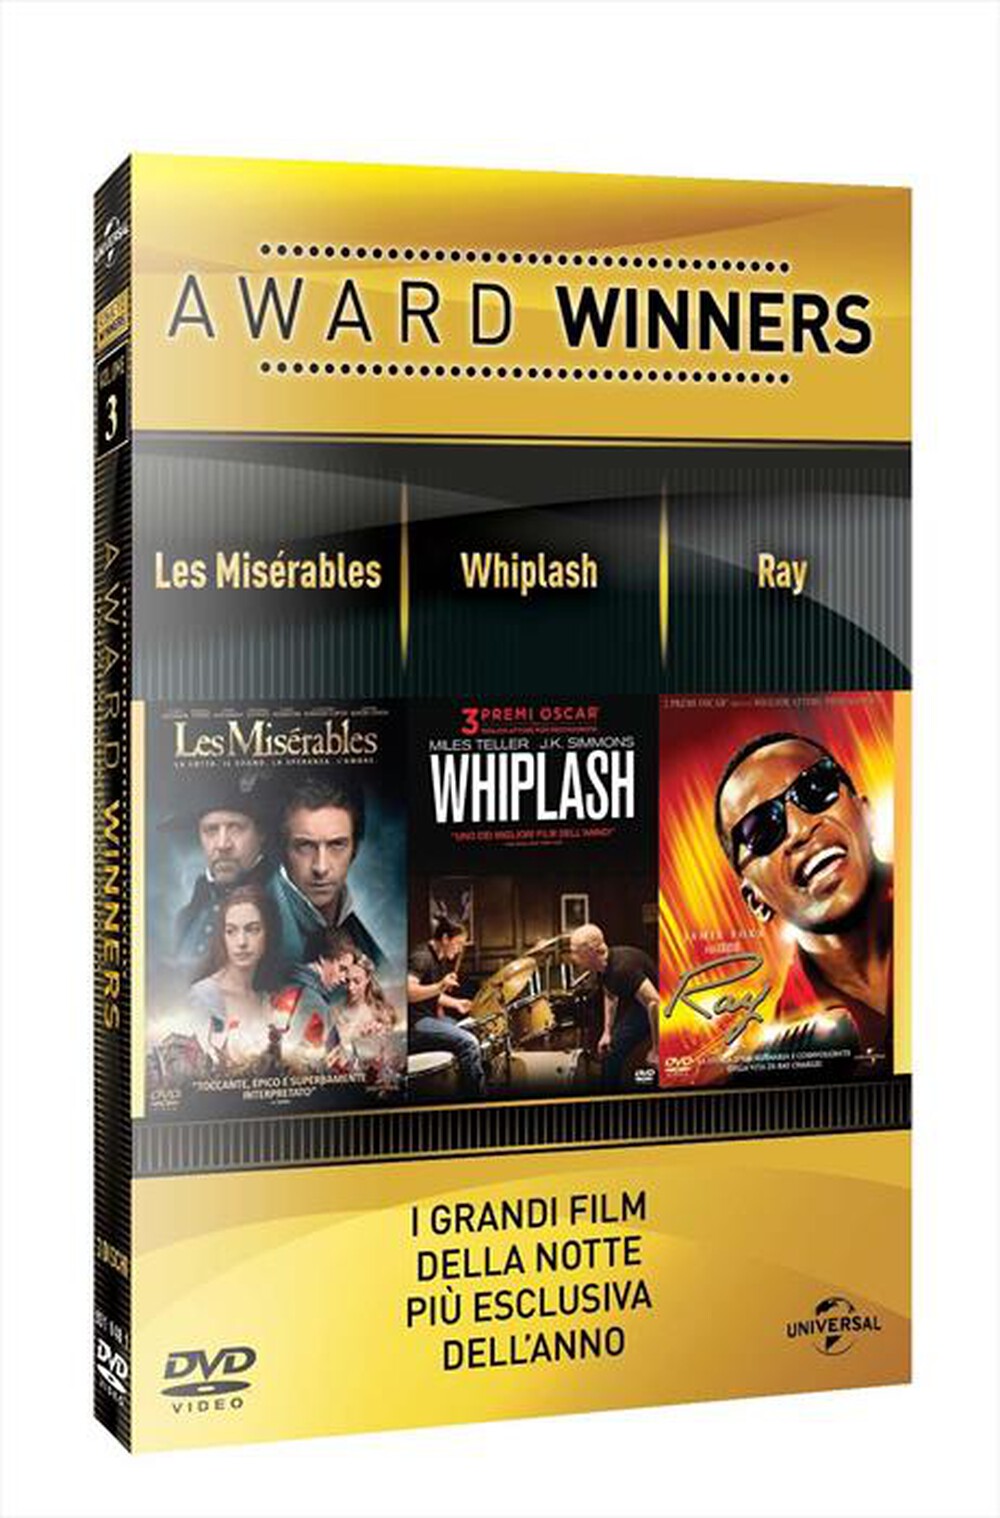 "UNIVERSAL PICTURES - Miserables (Les) / Whiplash / Ray - Oscar Collec"